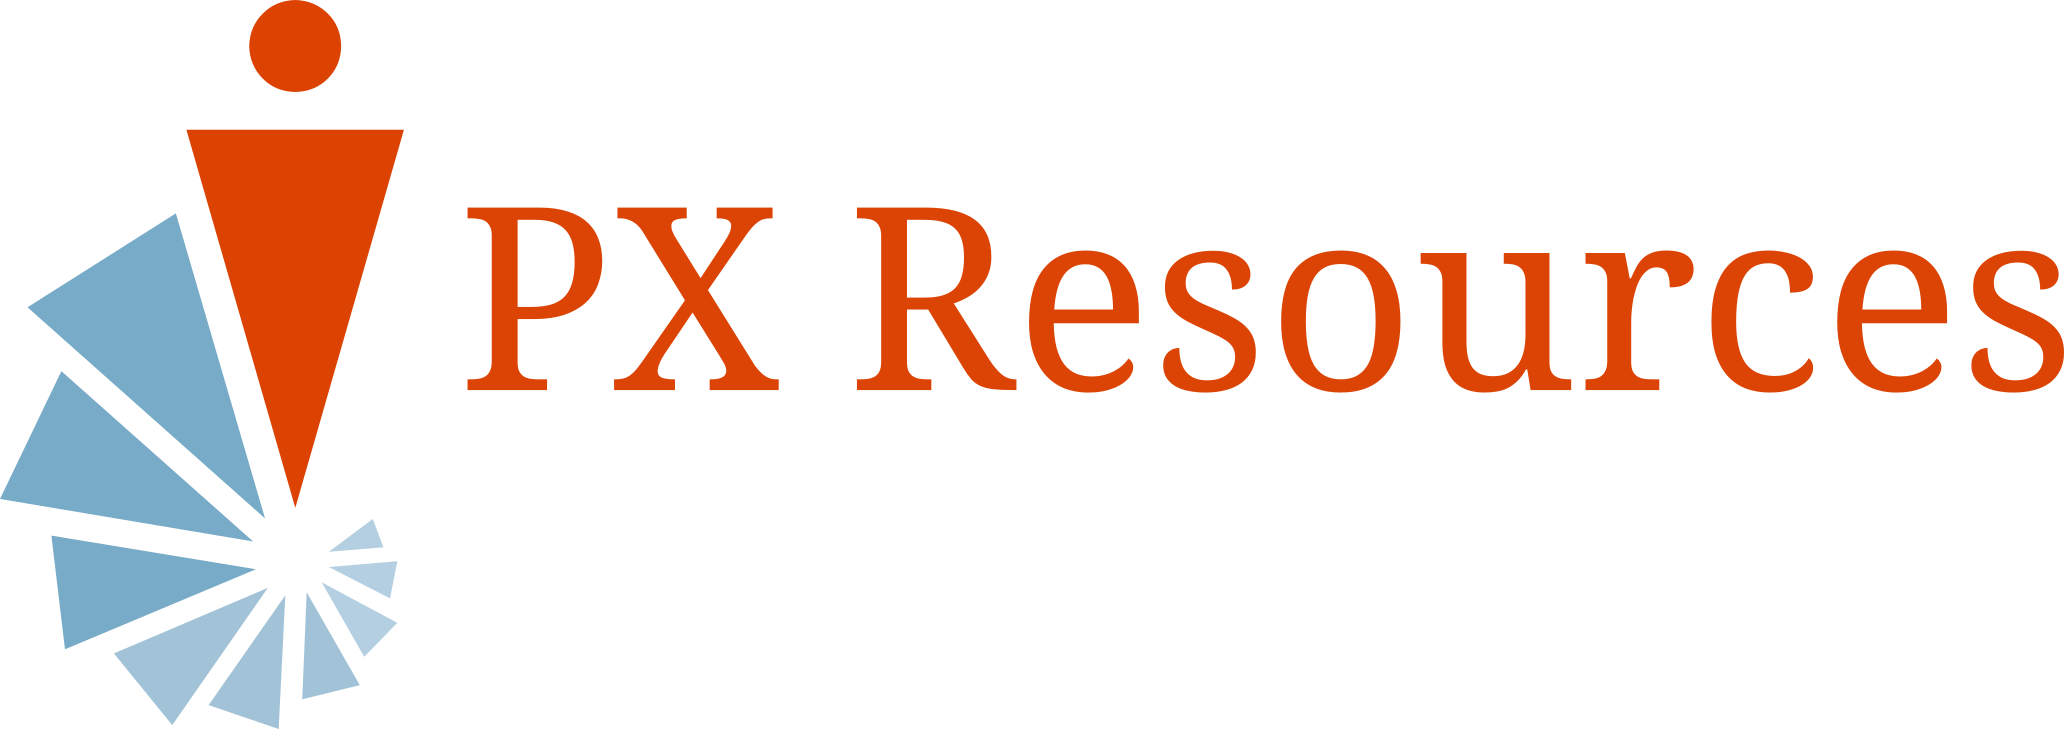 PX Resources